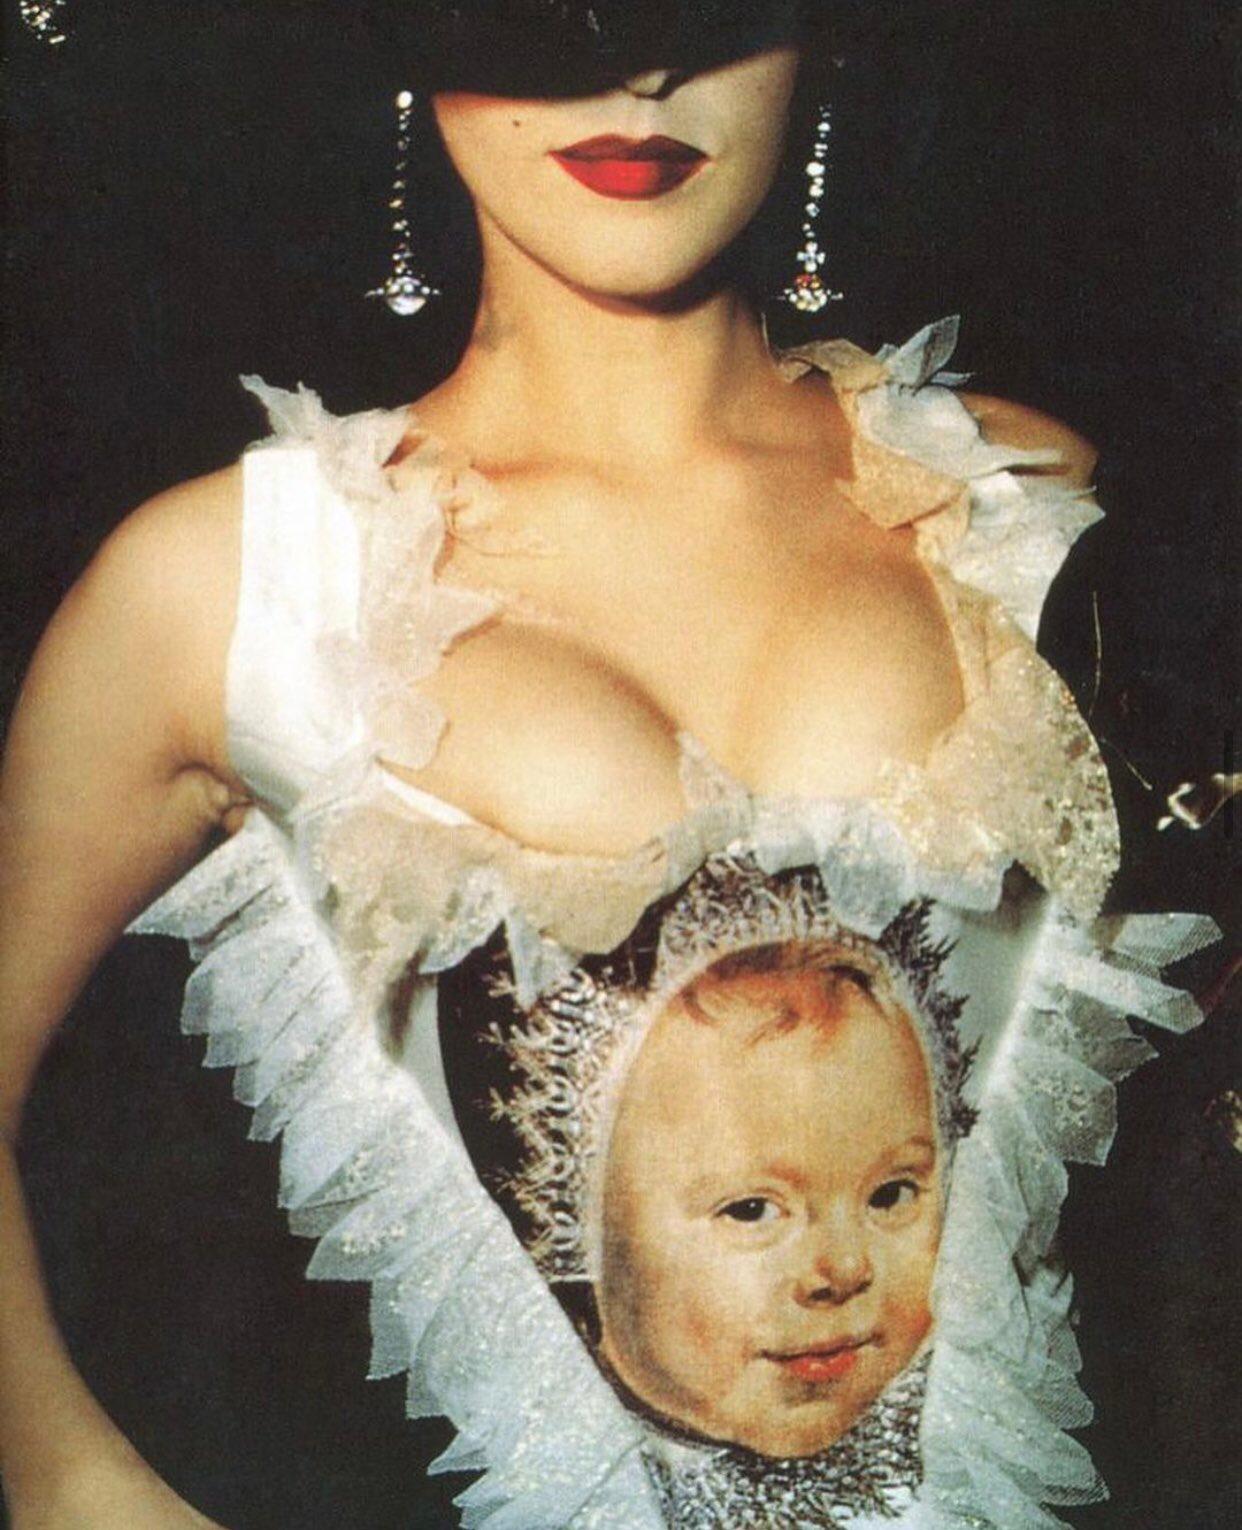  Iconic Frans Hals baby print corset from Vivienne Westwood's FW 1992 collection.

Size UK 14 - however size runs small. As photographed on a size UK 10 mannequin. 

Material: Viscose

Condition: Good. Some slight discoloration at the top of the